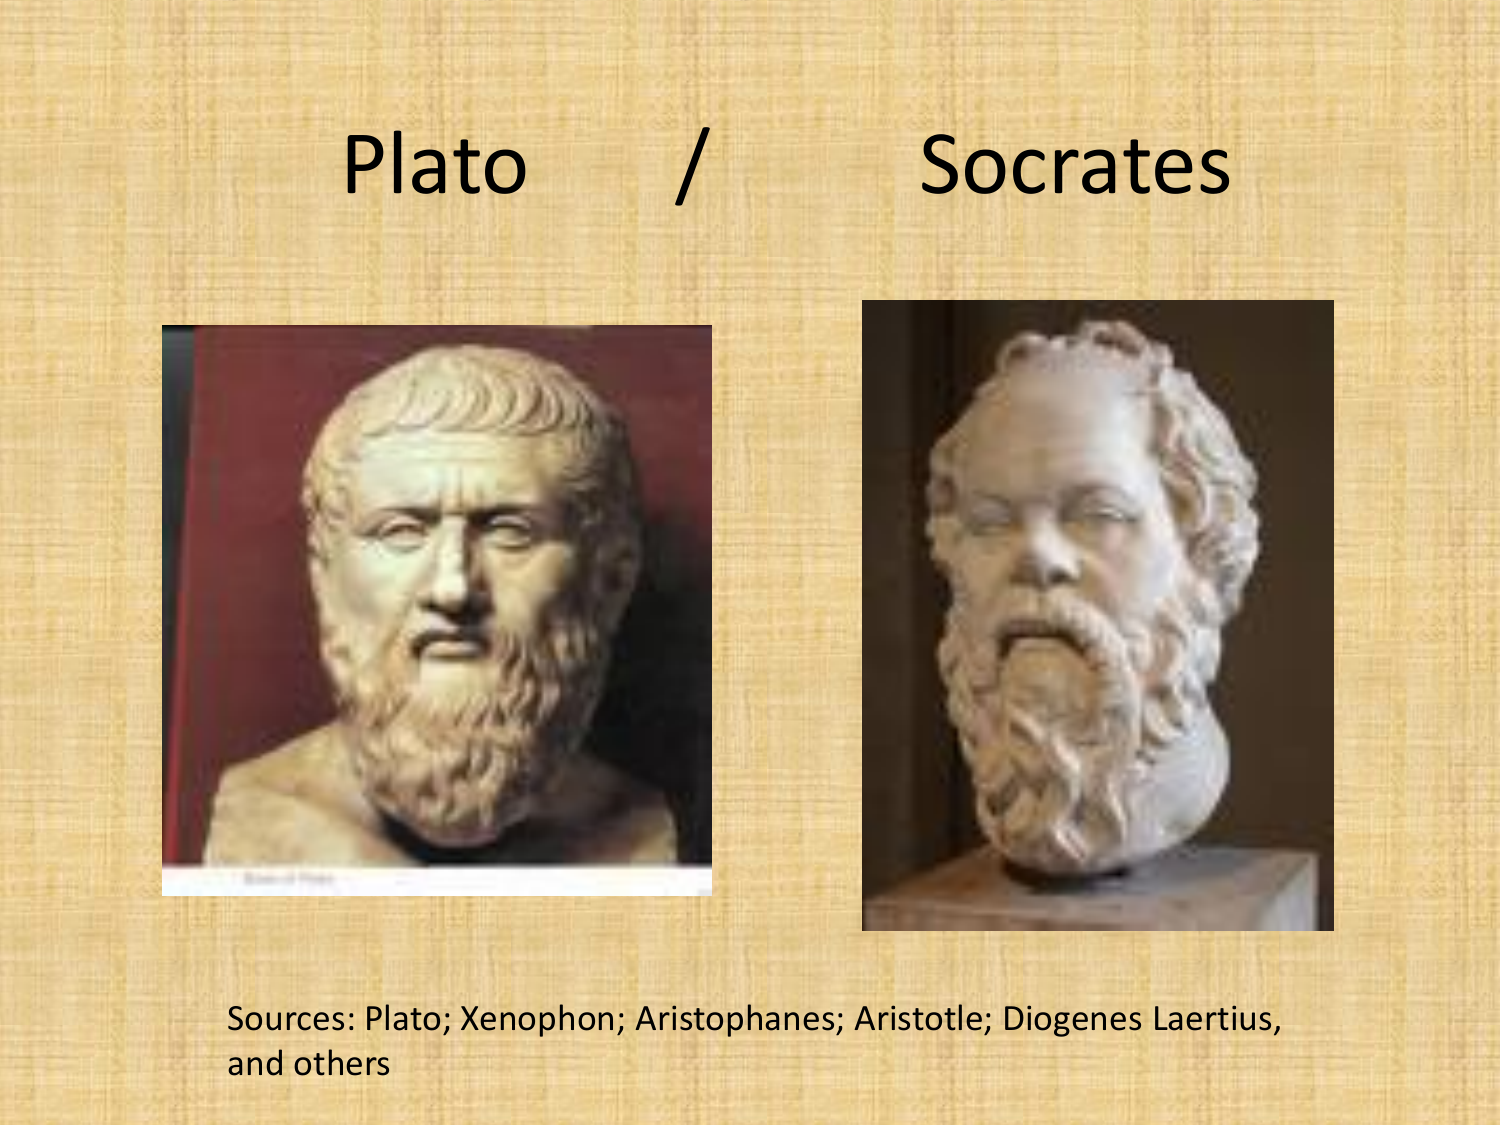 what were the charges against socrates